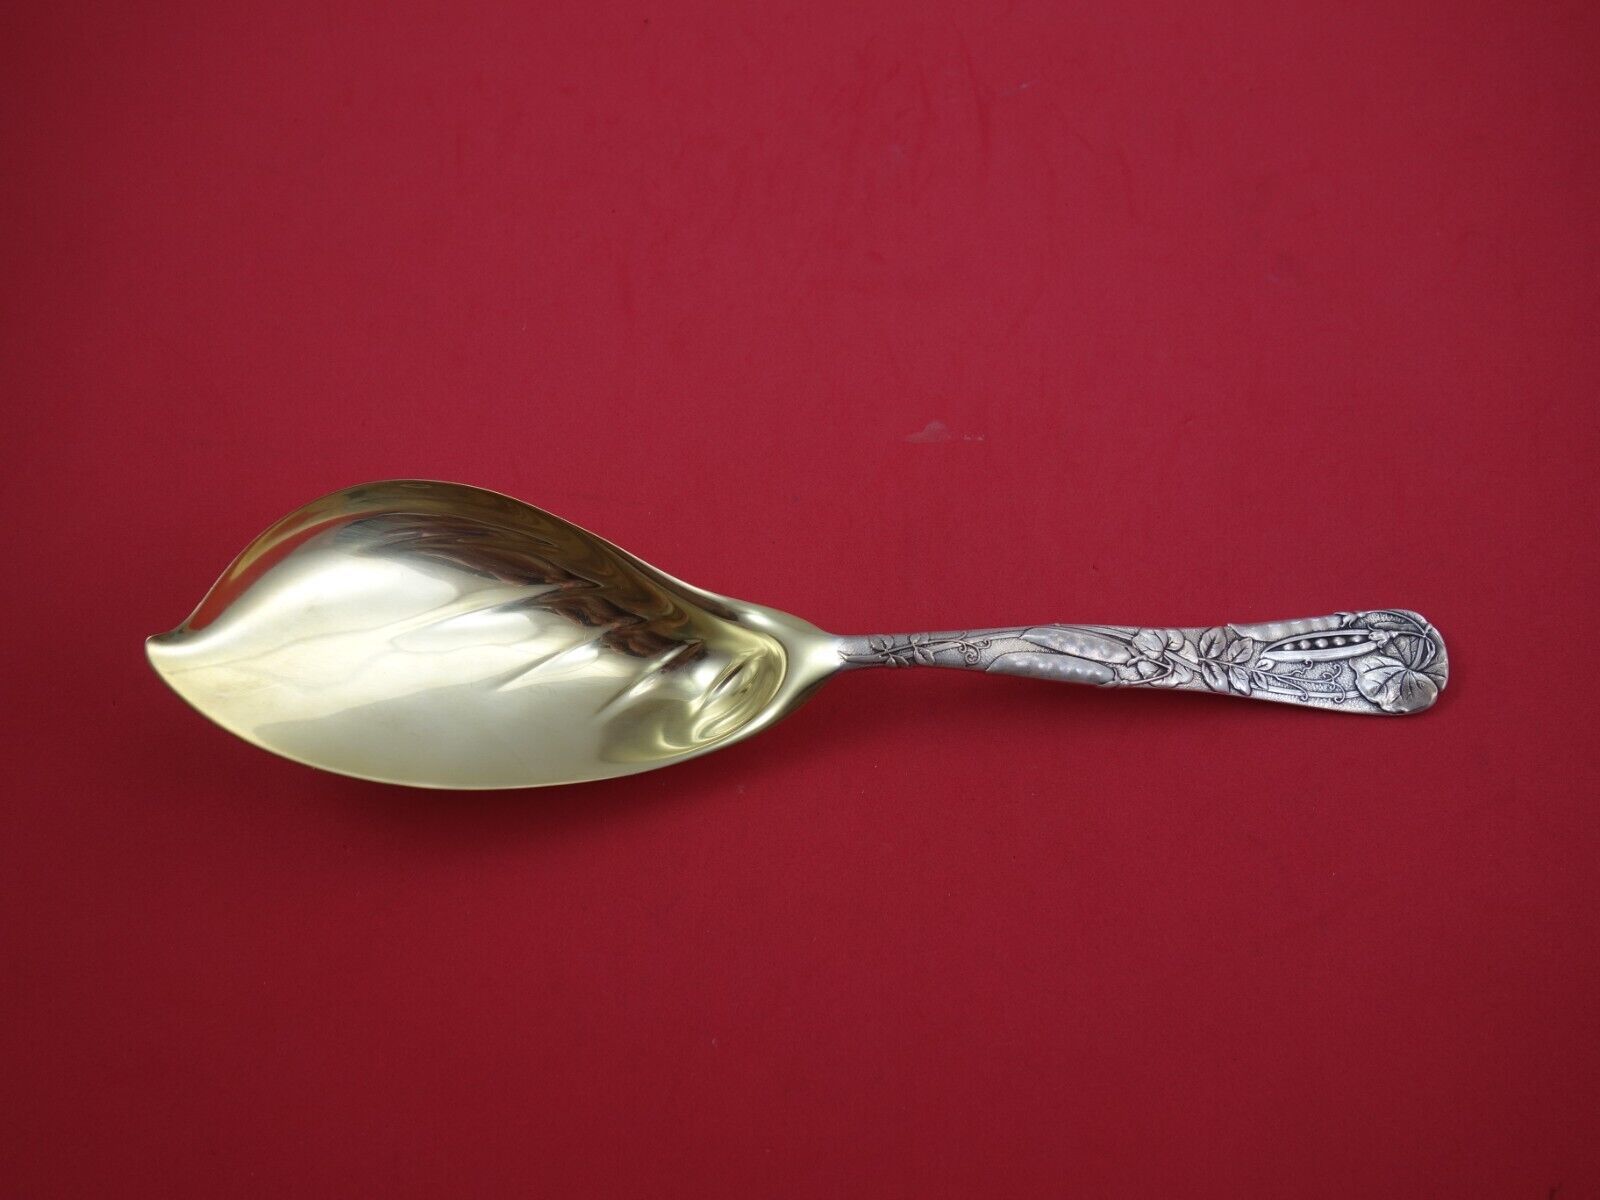 Primary image for Vine by Tiffany Sterling Silver Ice Cream Server GW Peapod Motif IN TIFFANY BOOK